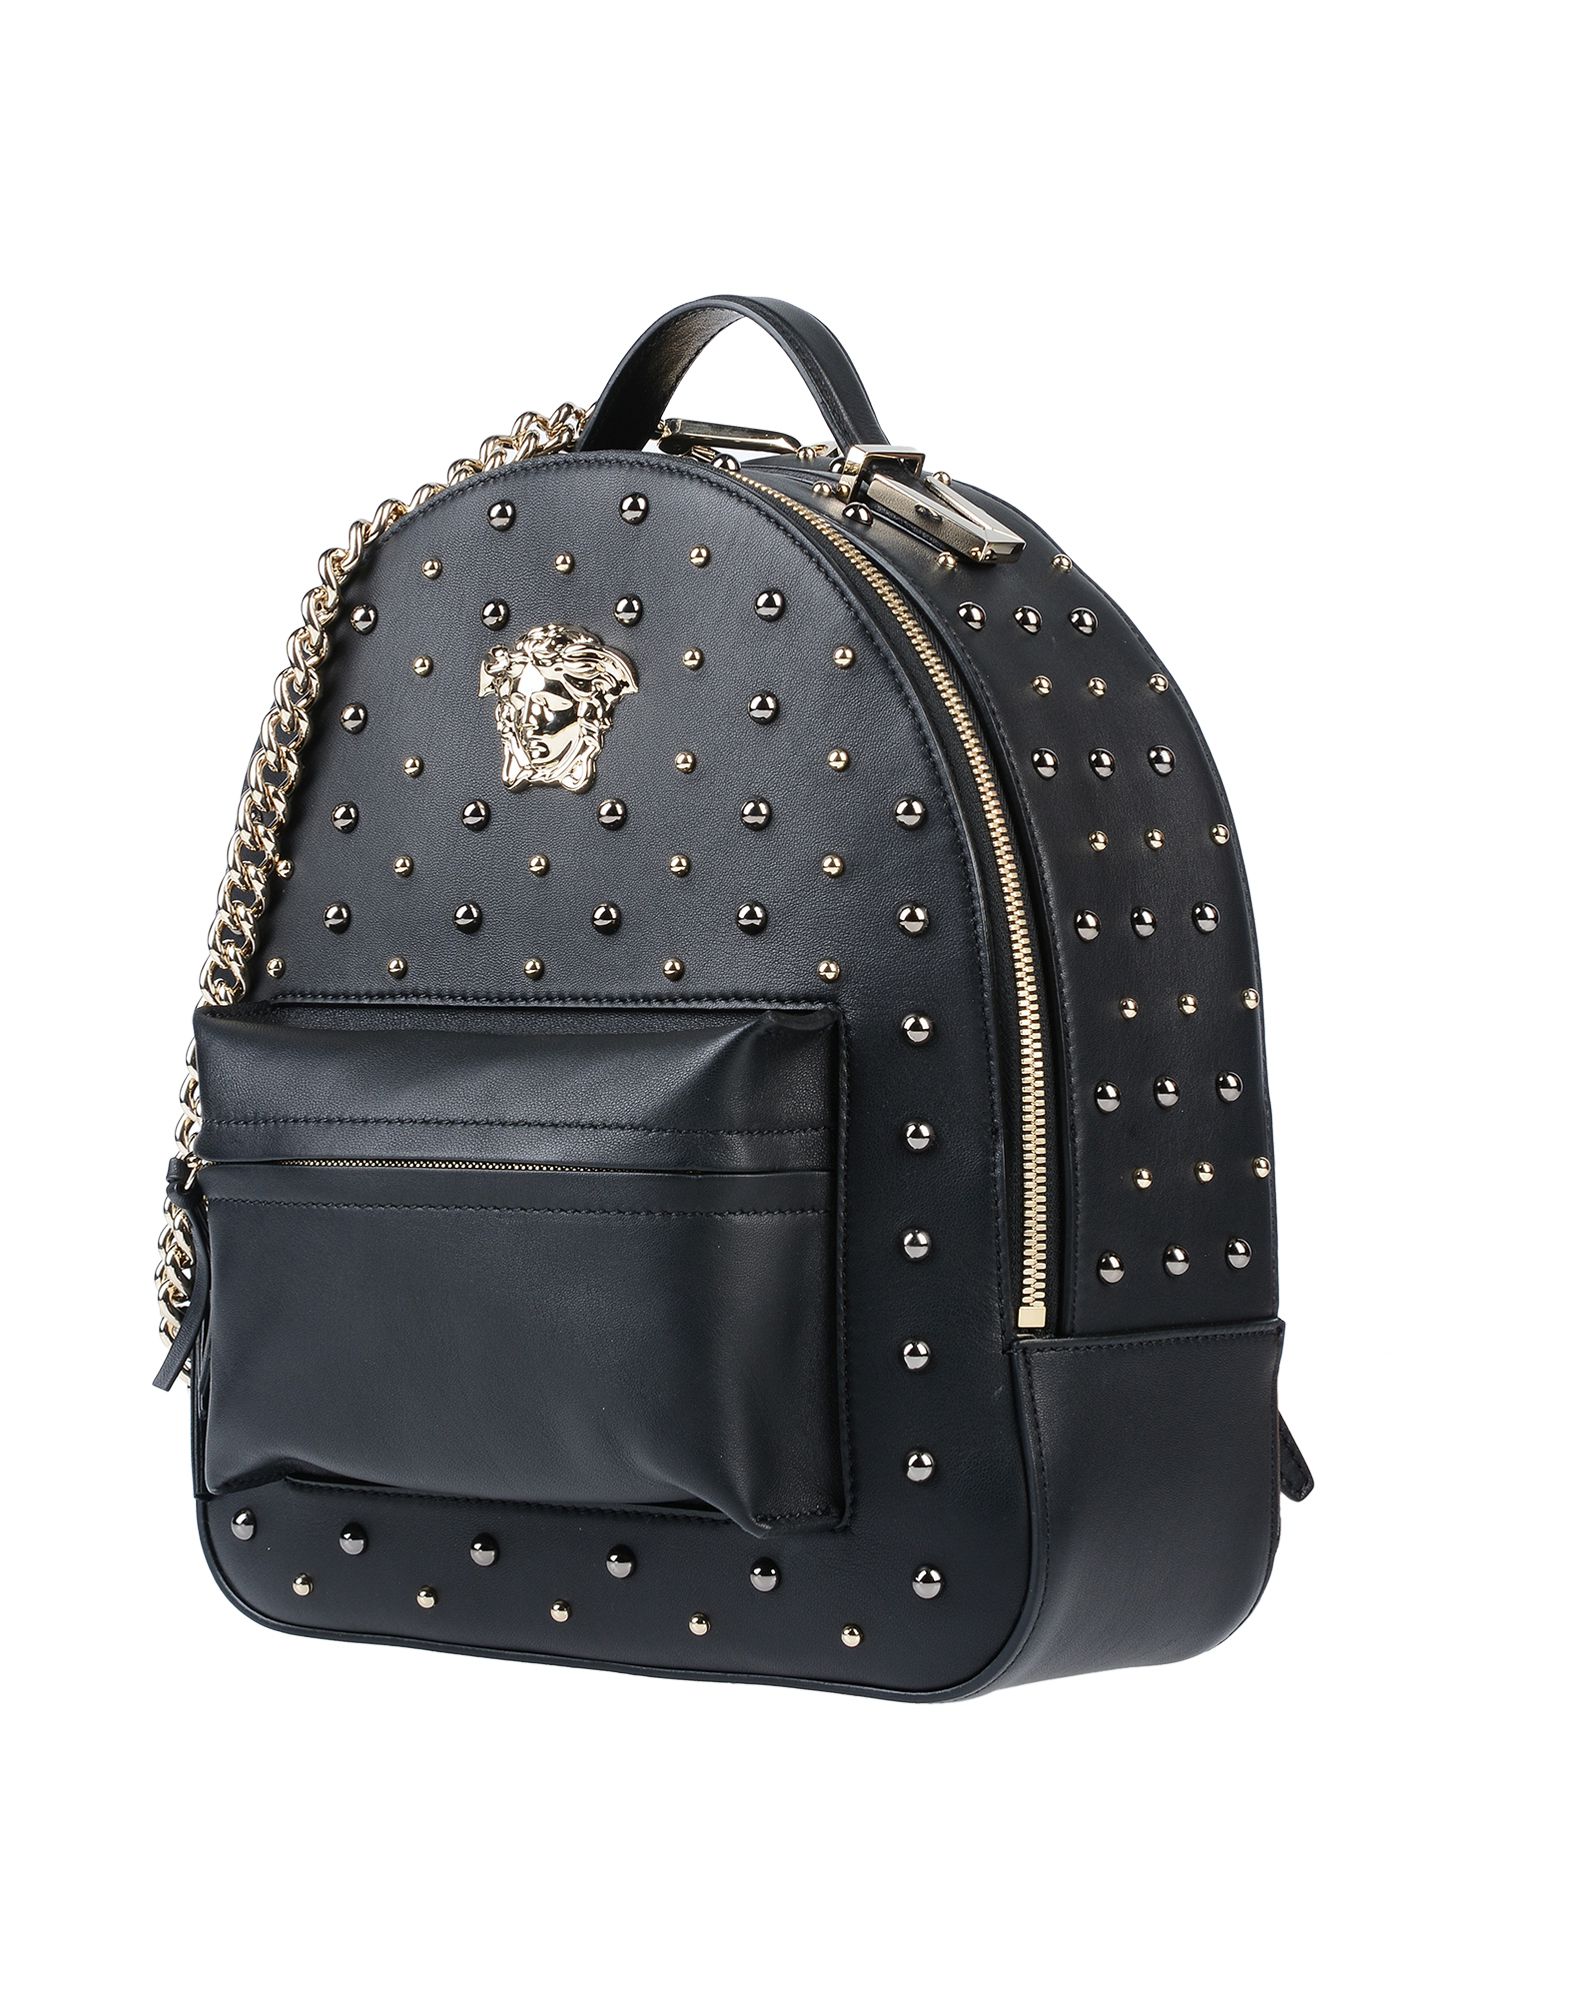 VERSACE Backpack & fanny pack,45458846QF 1